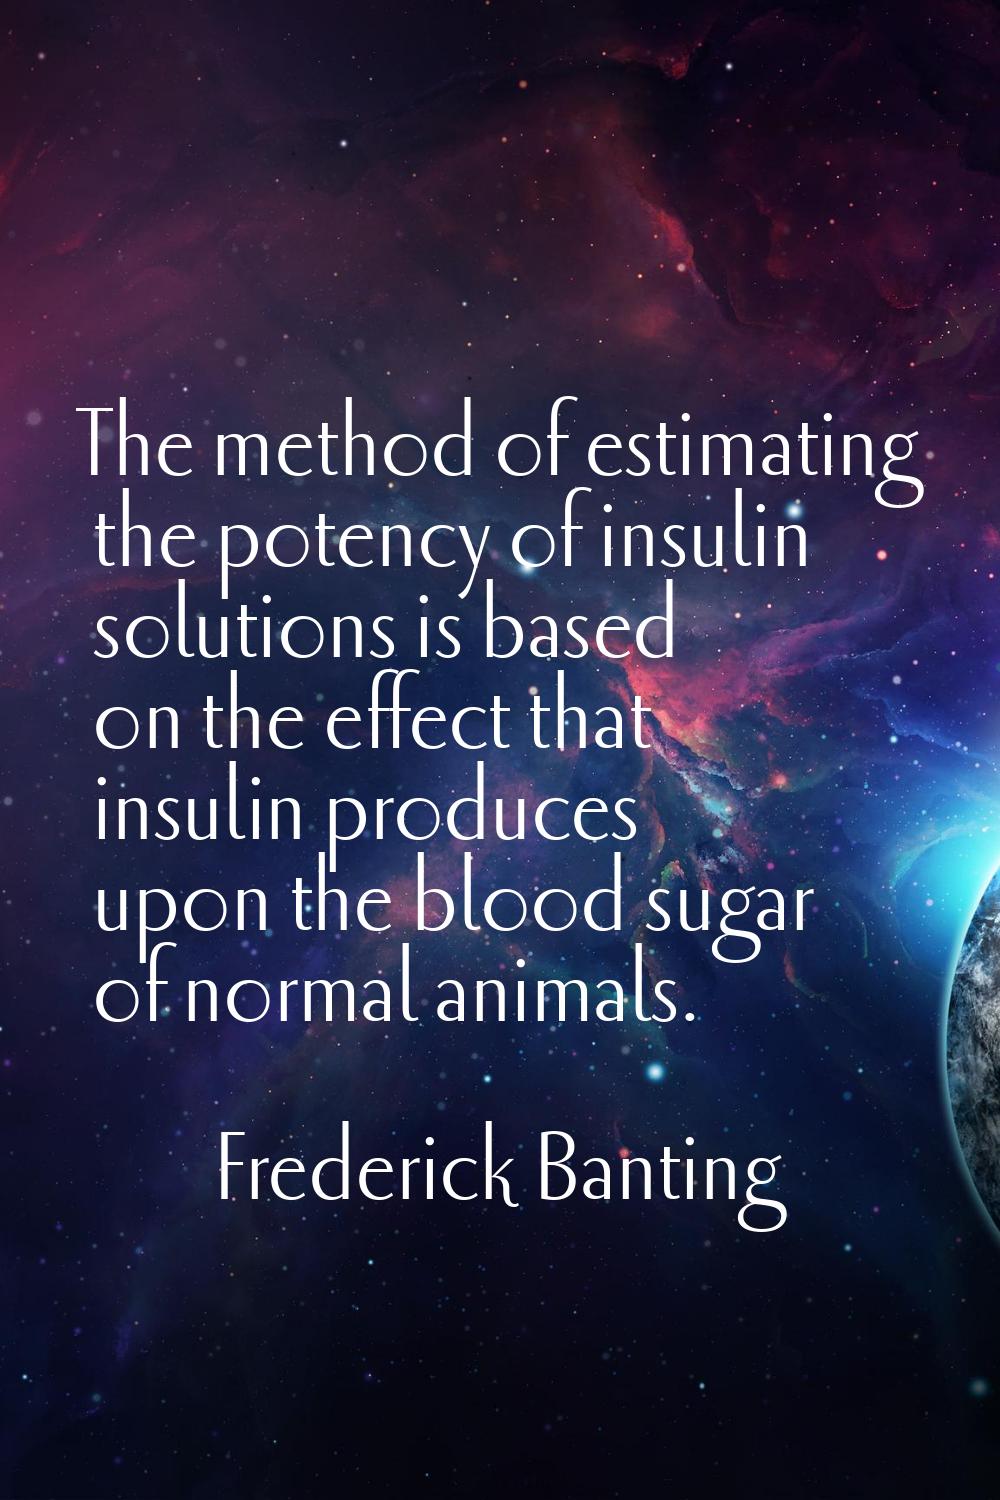 The method of estimating the potency of insulin solutions is based on the effect that insulin produ